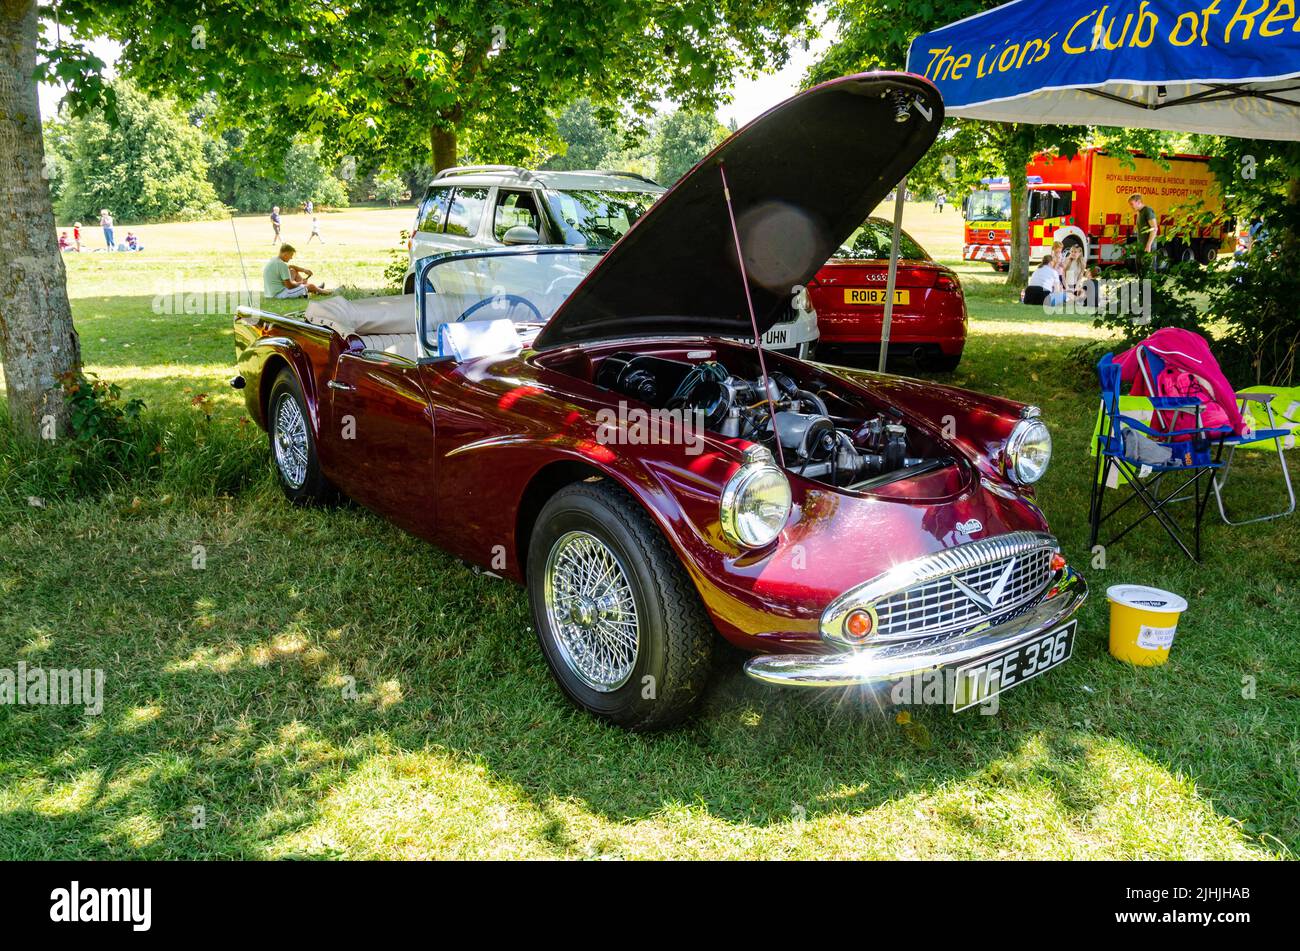 A Daimler SP250 Sports car in burgundy with it's bonnet open revealing the engine bay at The Berkshire Motor Show in Reading, UK Stock Photo